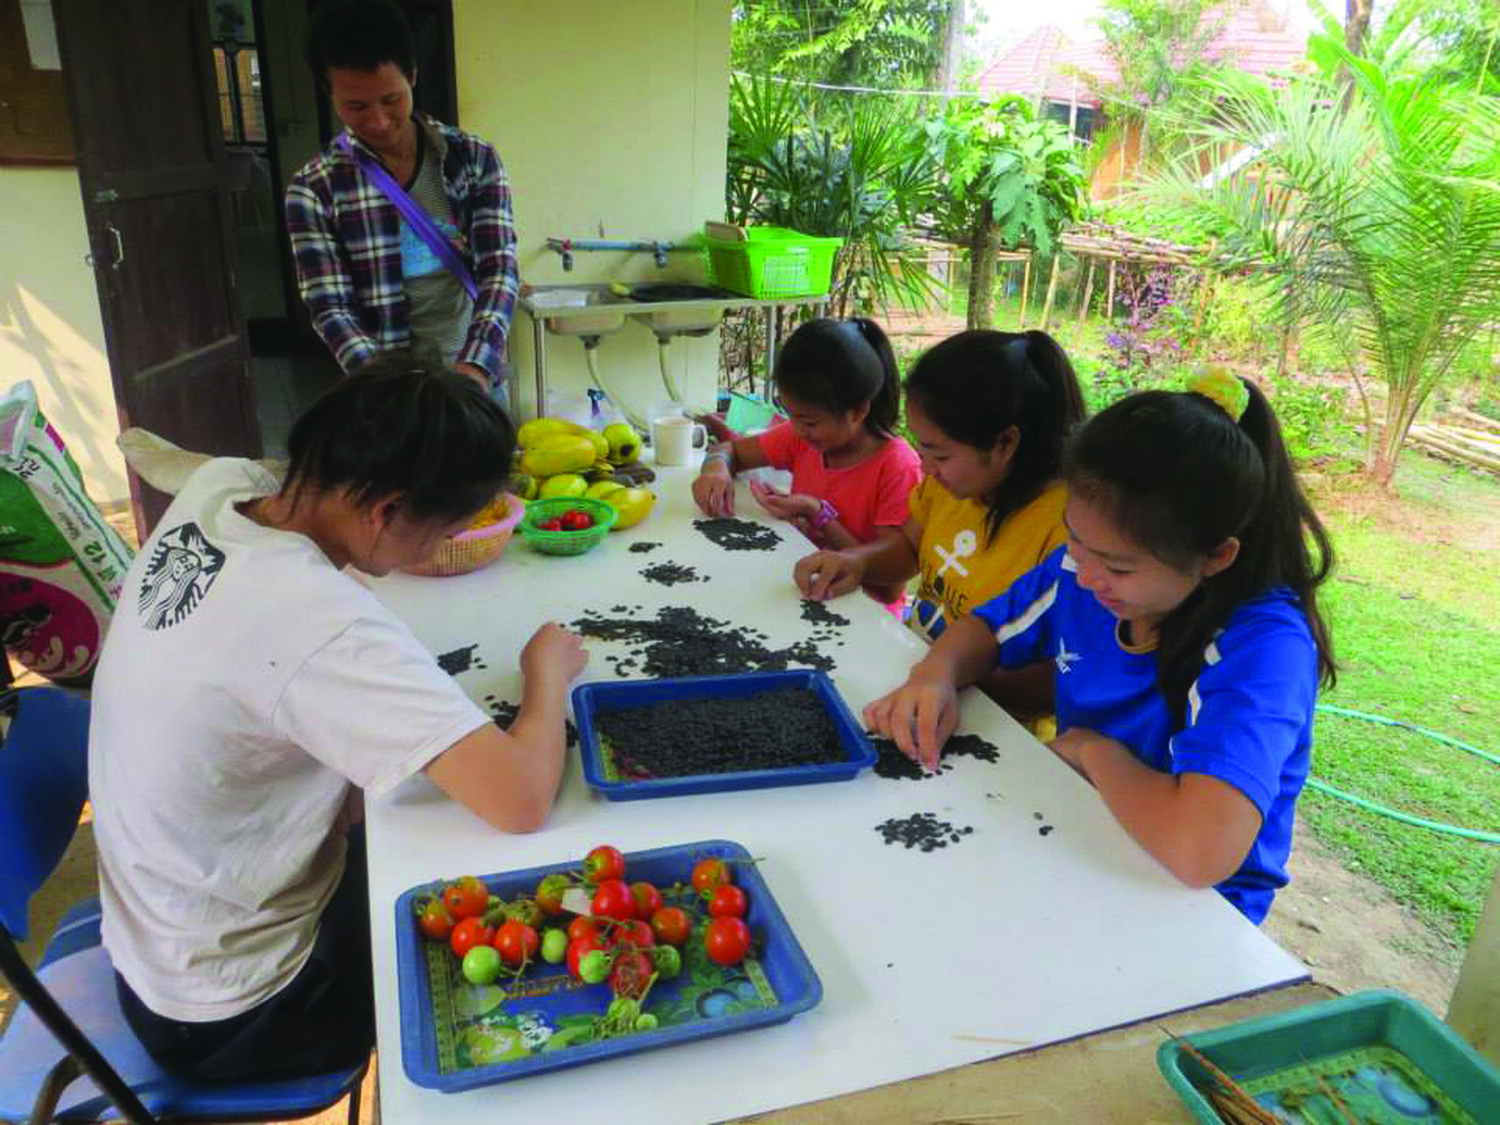 Volunteers in Thailand sort seeds by hand to assist the ECHO Asia Seed Bank as they provide seeds across the Region